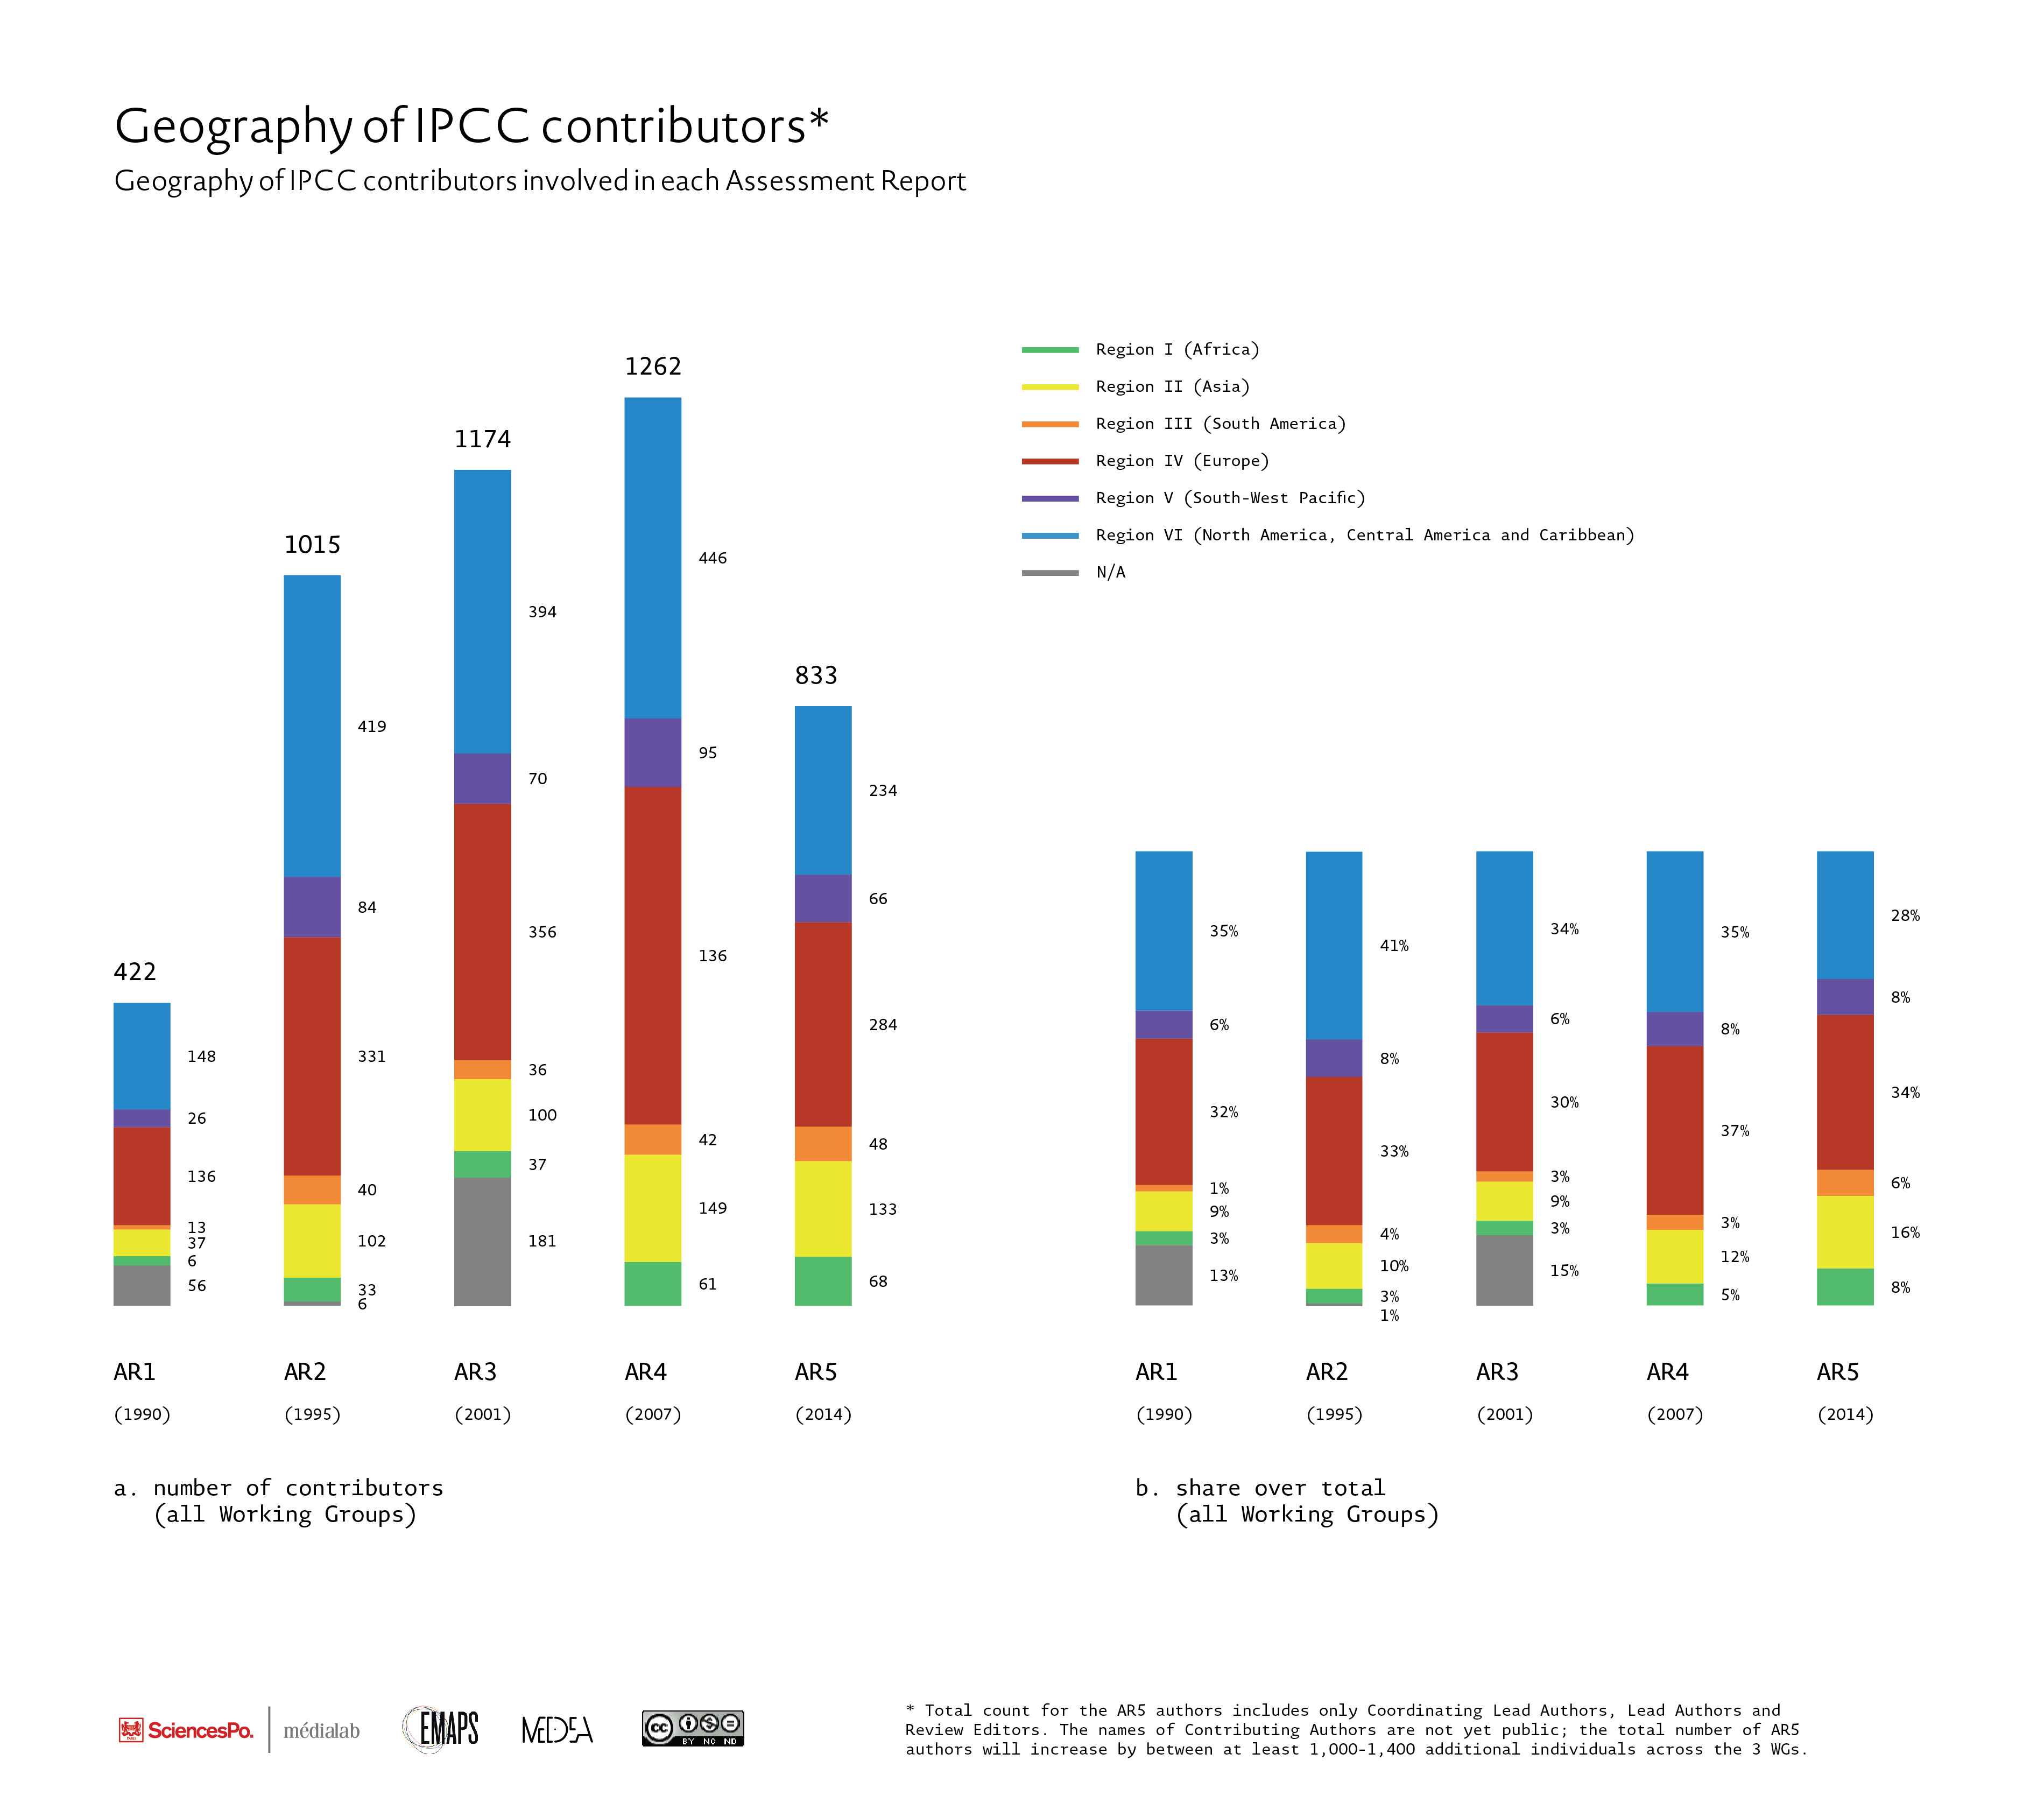 Fig. 2a. Geography of IPCC contributors